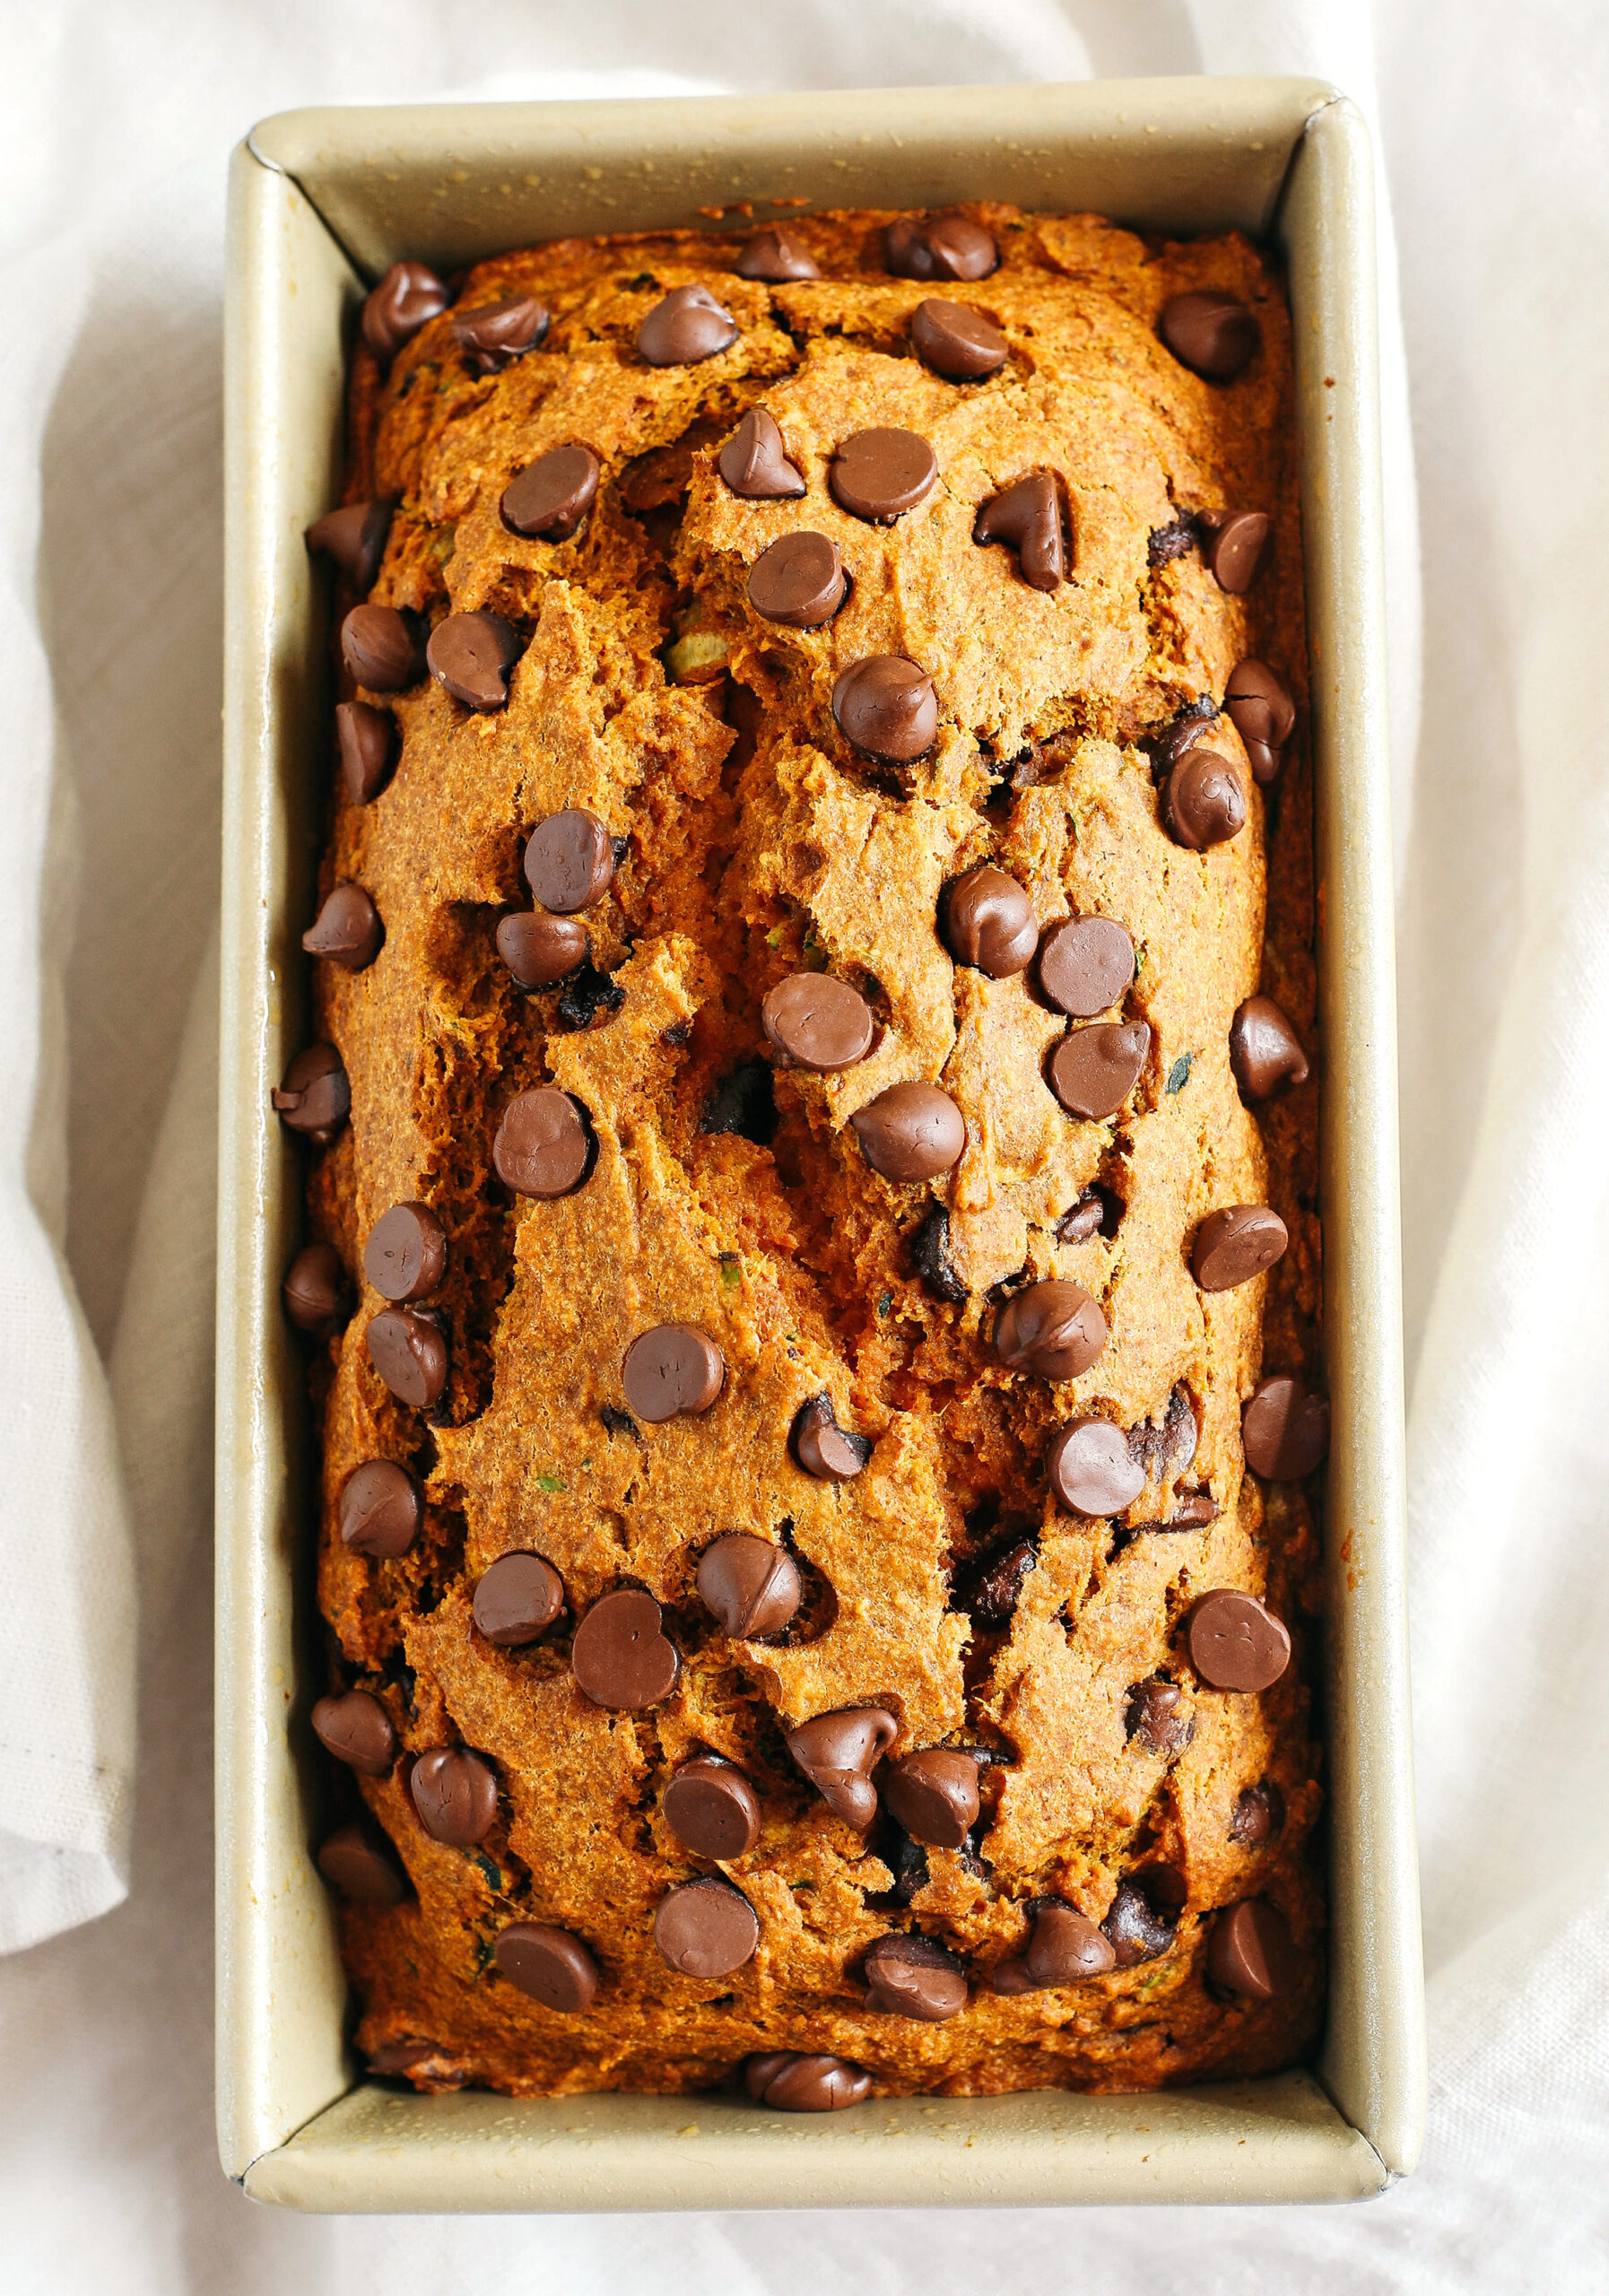 Healthy Pumpkin Zucchini Bread that is moist, fluffy and made healthier with whole wheat flour, Greek yogurt, shredded zucchini and zero butter or refined sugar.  Loaded with warm flavors and studded with chunks of chocolate in every bite!